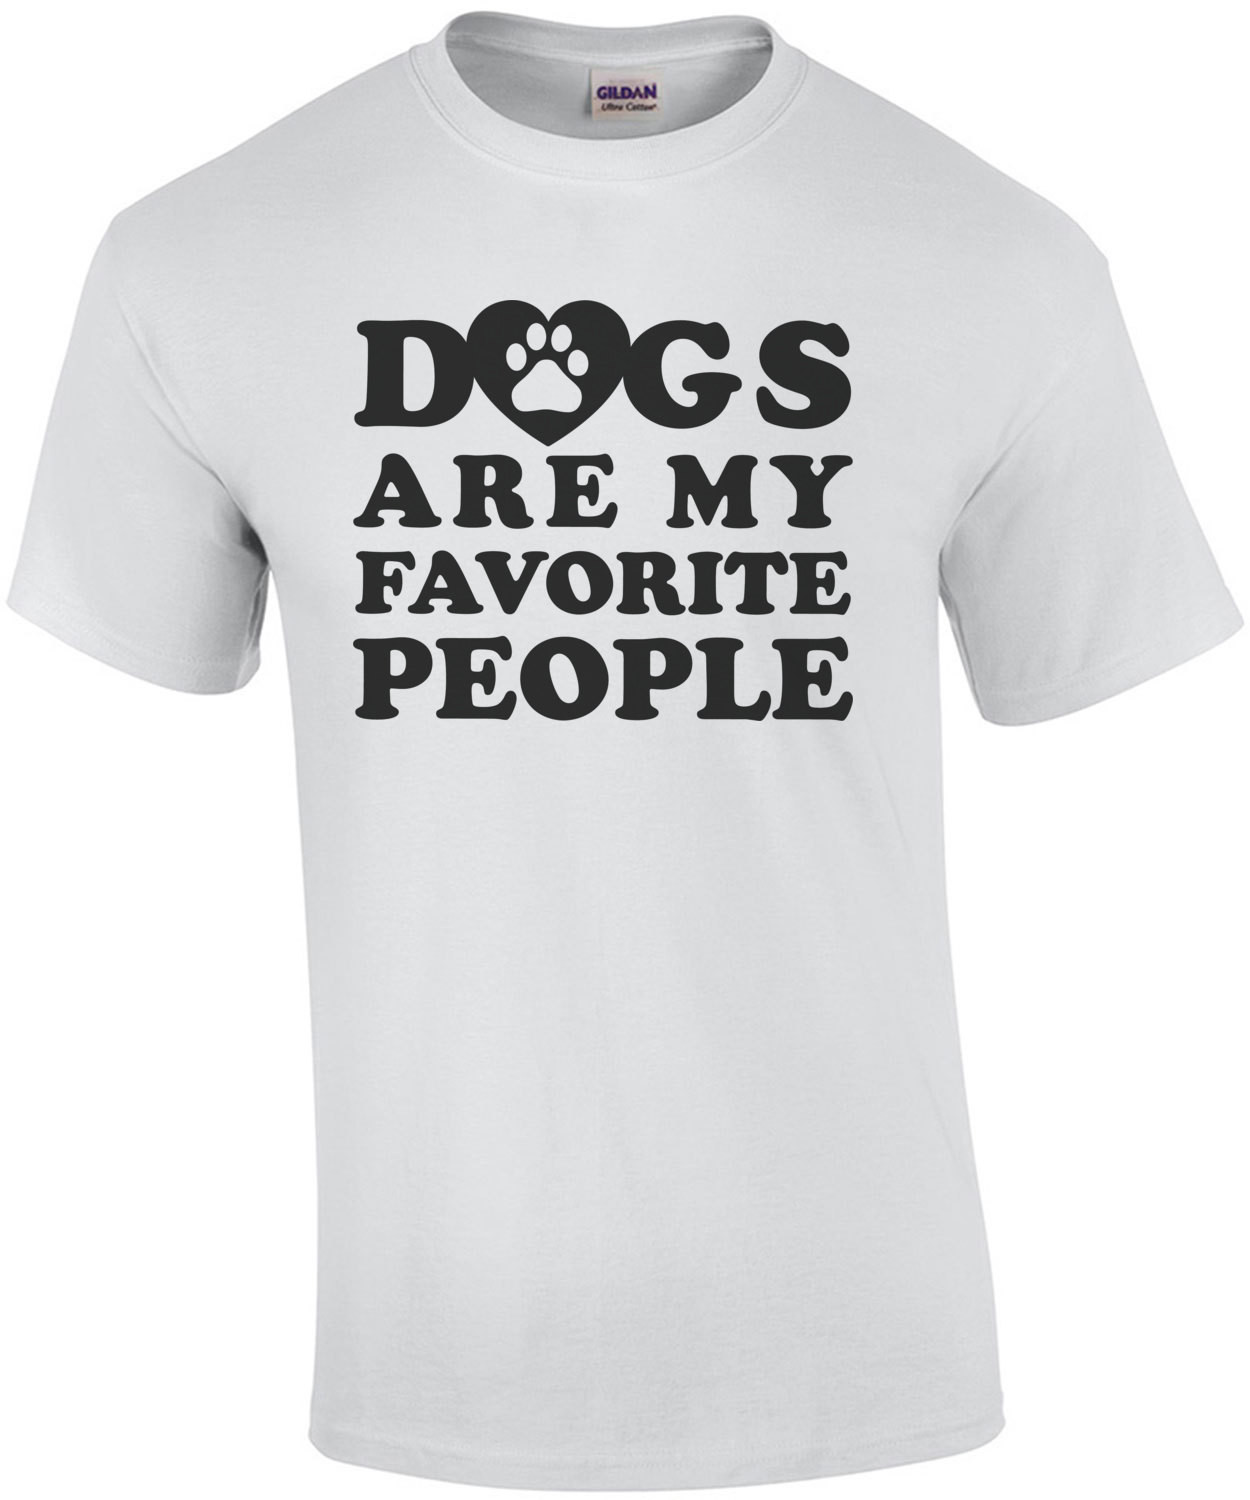 Dogs are my favorite people - funny dog lover